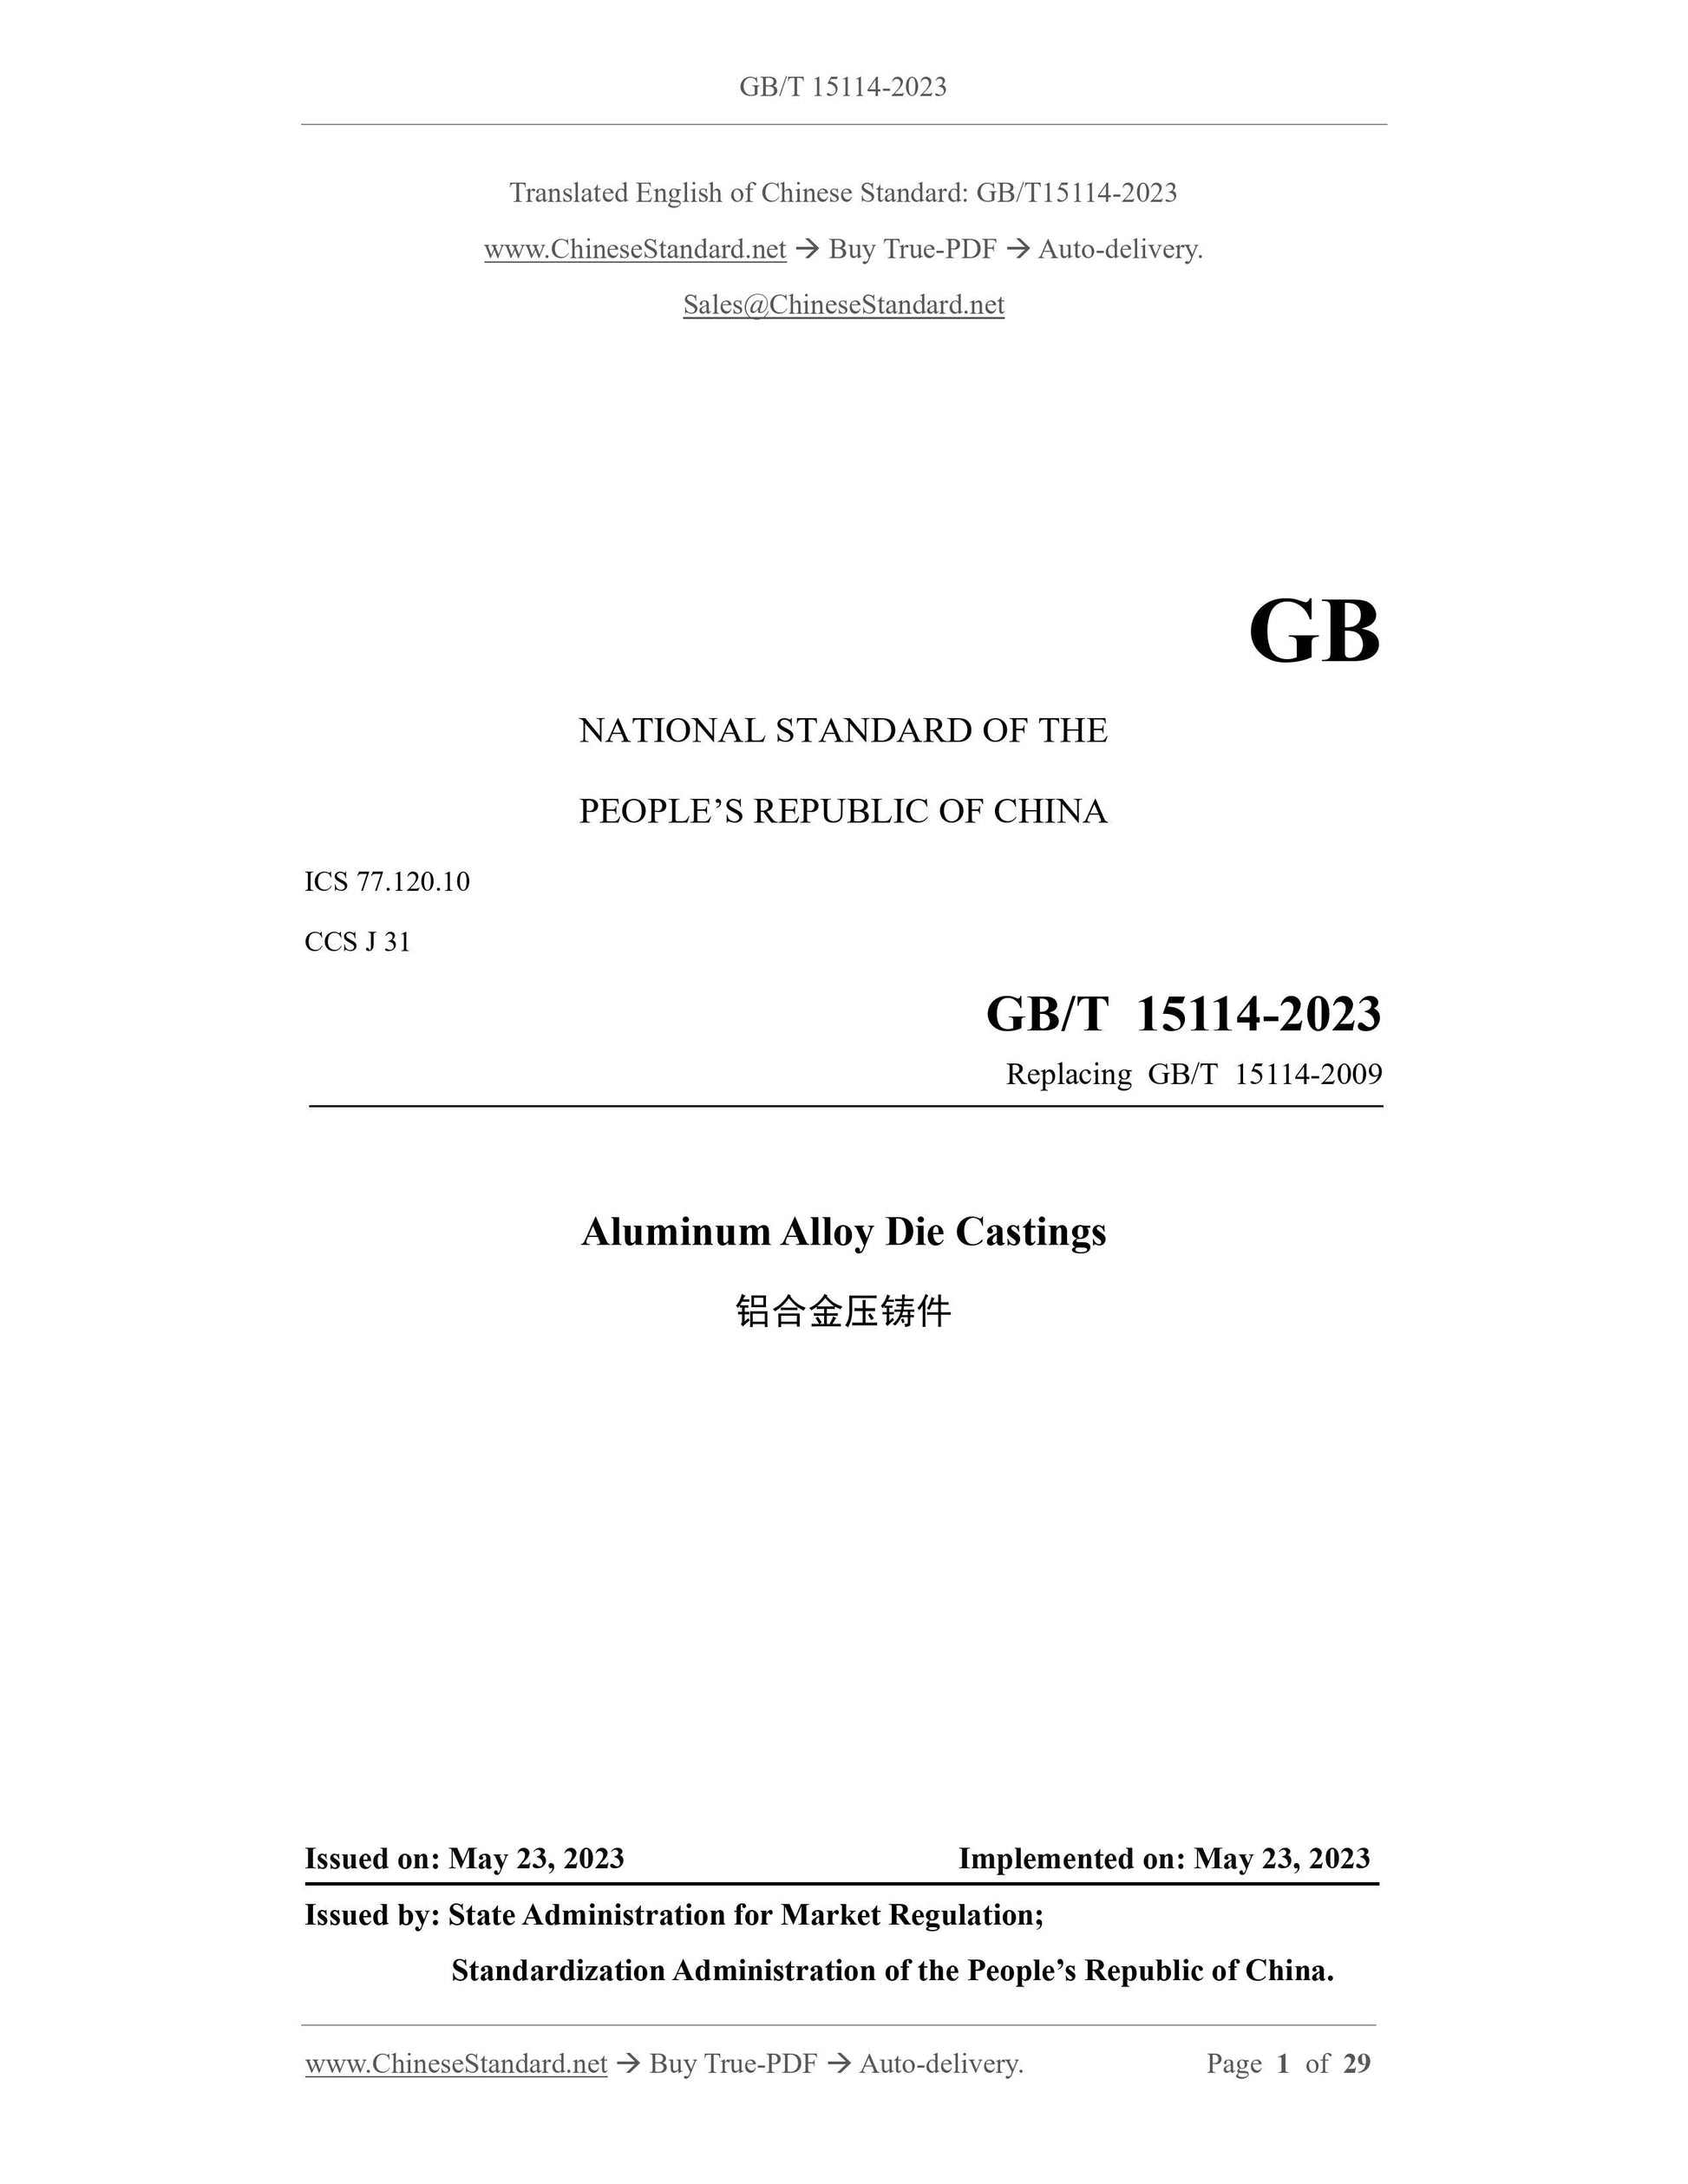 GB/T 15114-2023 Page 1